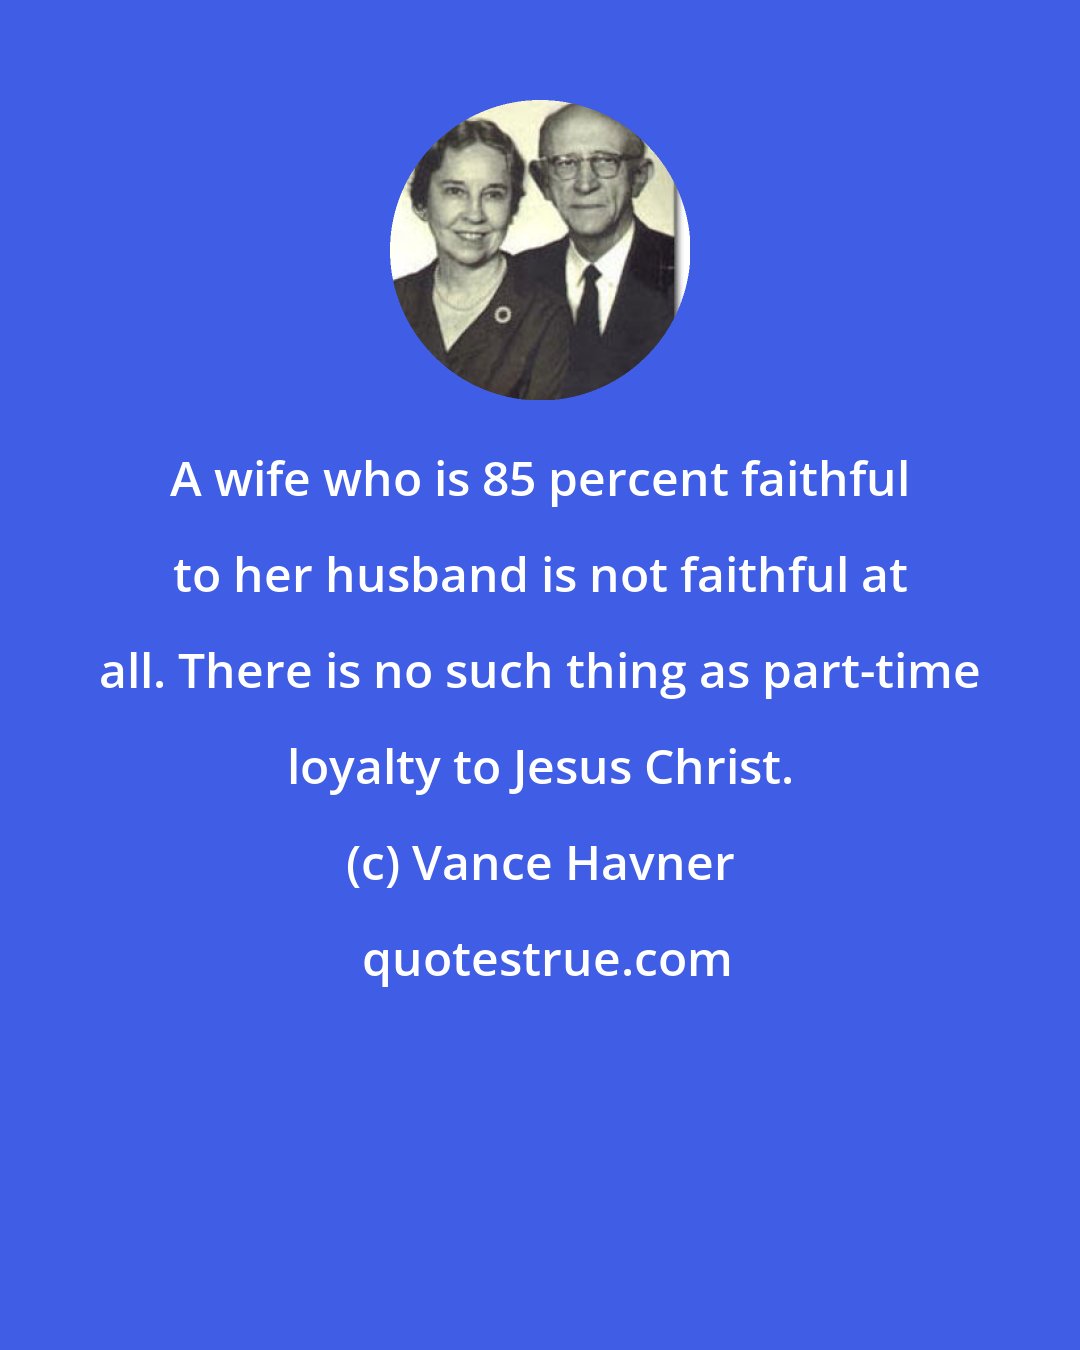 Vance Havner: A wife who is 85 percent faithful to her husband is not faithful at all. There is no such thing as part-time loyalty to Jesus Christ.